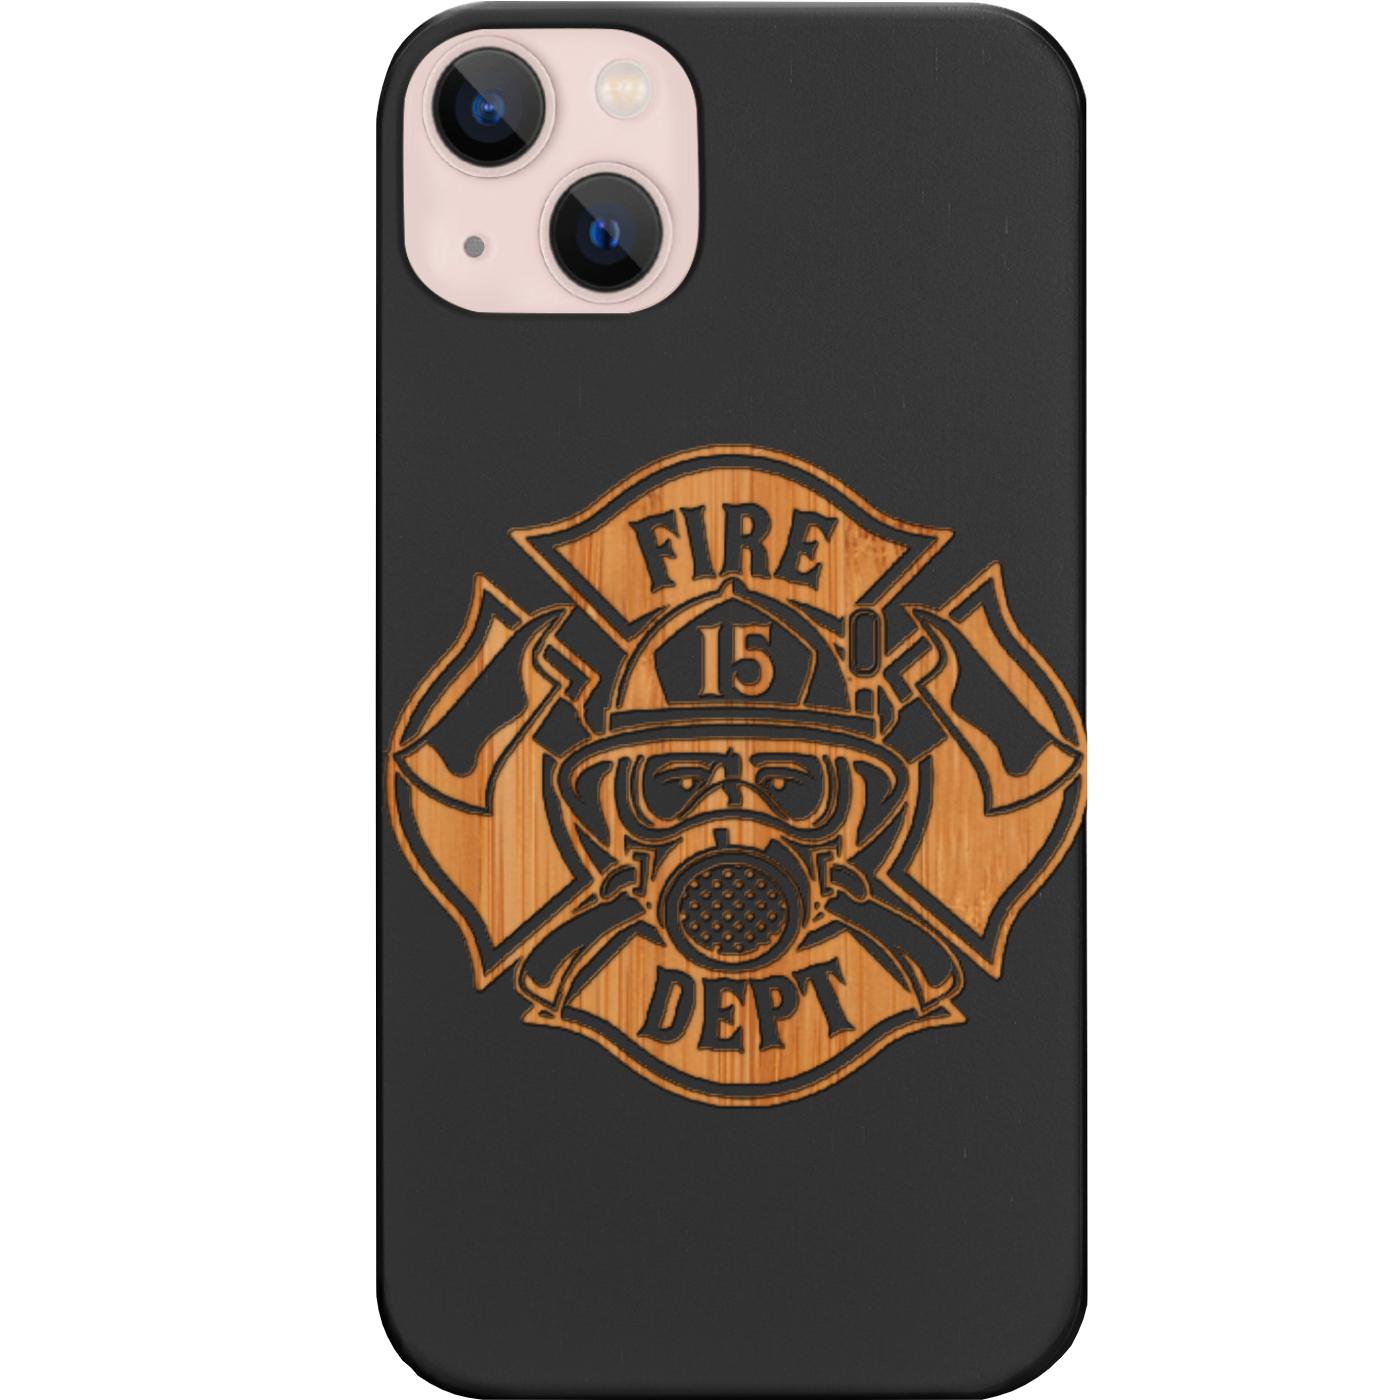 Fire Department - Engraved  Phone Case